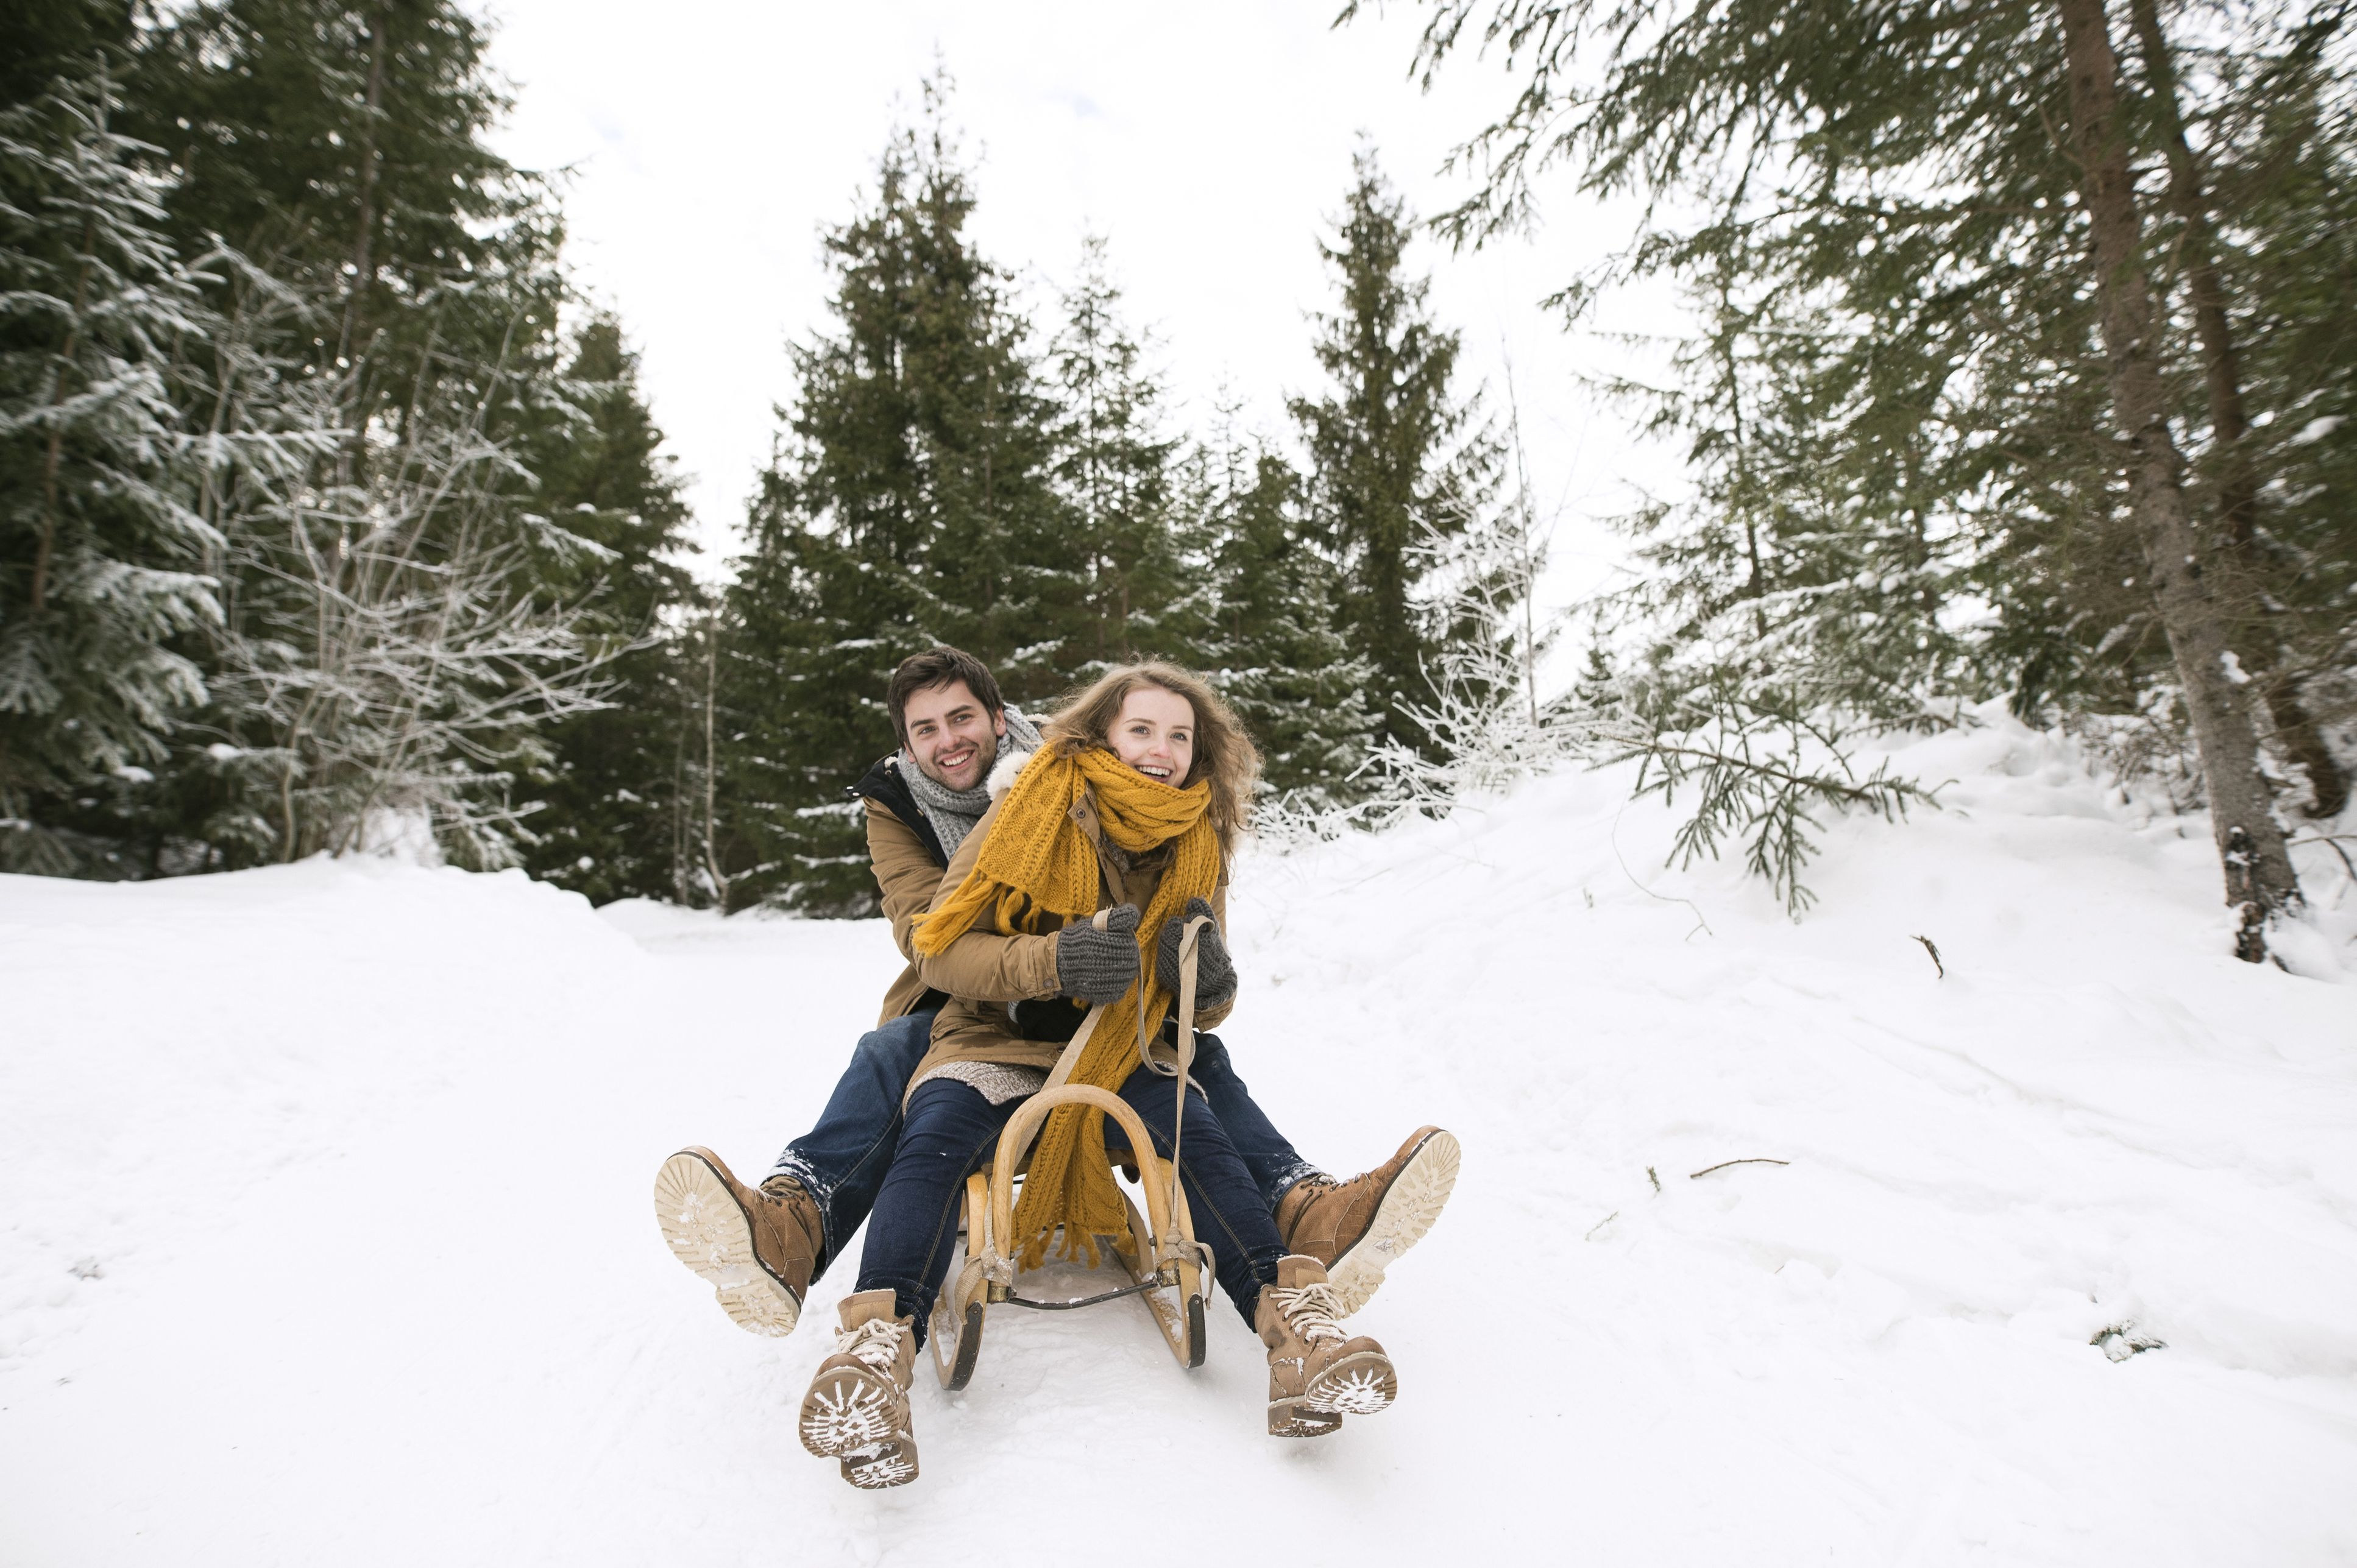 Best Winter Date Ideas for Teens - Winter Date Ideas for Teenage Couples